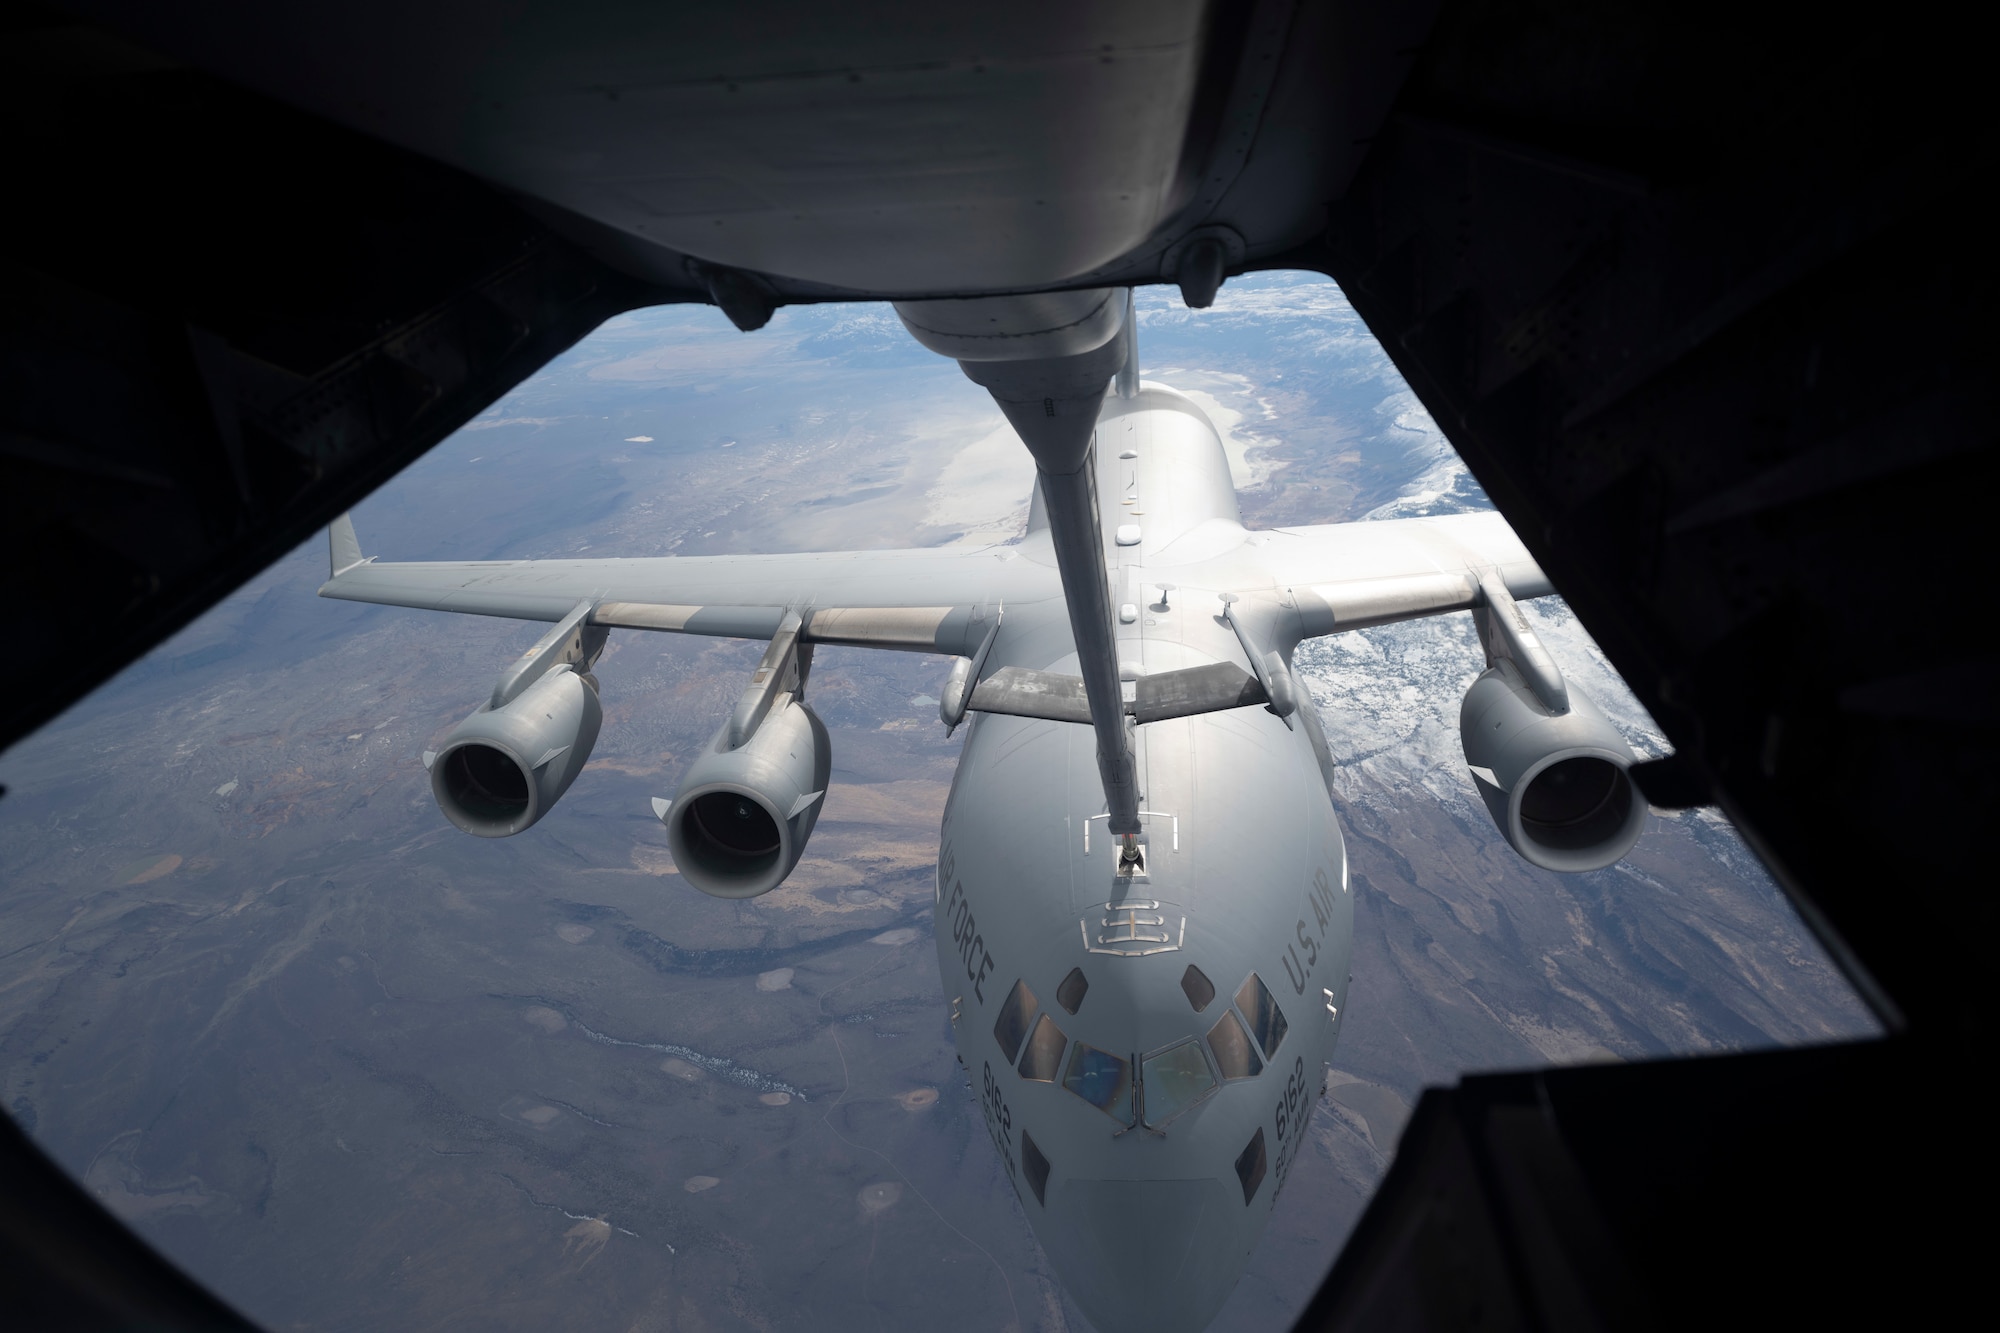 A KC-10 Extender boom makes contact with a C-17 Globemaster III Nov. 16, 2020, over Oregon. The aircrew for both aircraft, assigned to Travis Air Force Base, California, simulated air refueling procedures as part of a basewide exercise. (U.S. Air Force photo by Airman 1st Class Alexander Merchak)